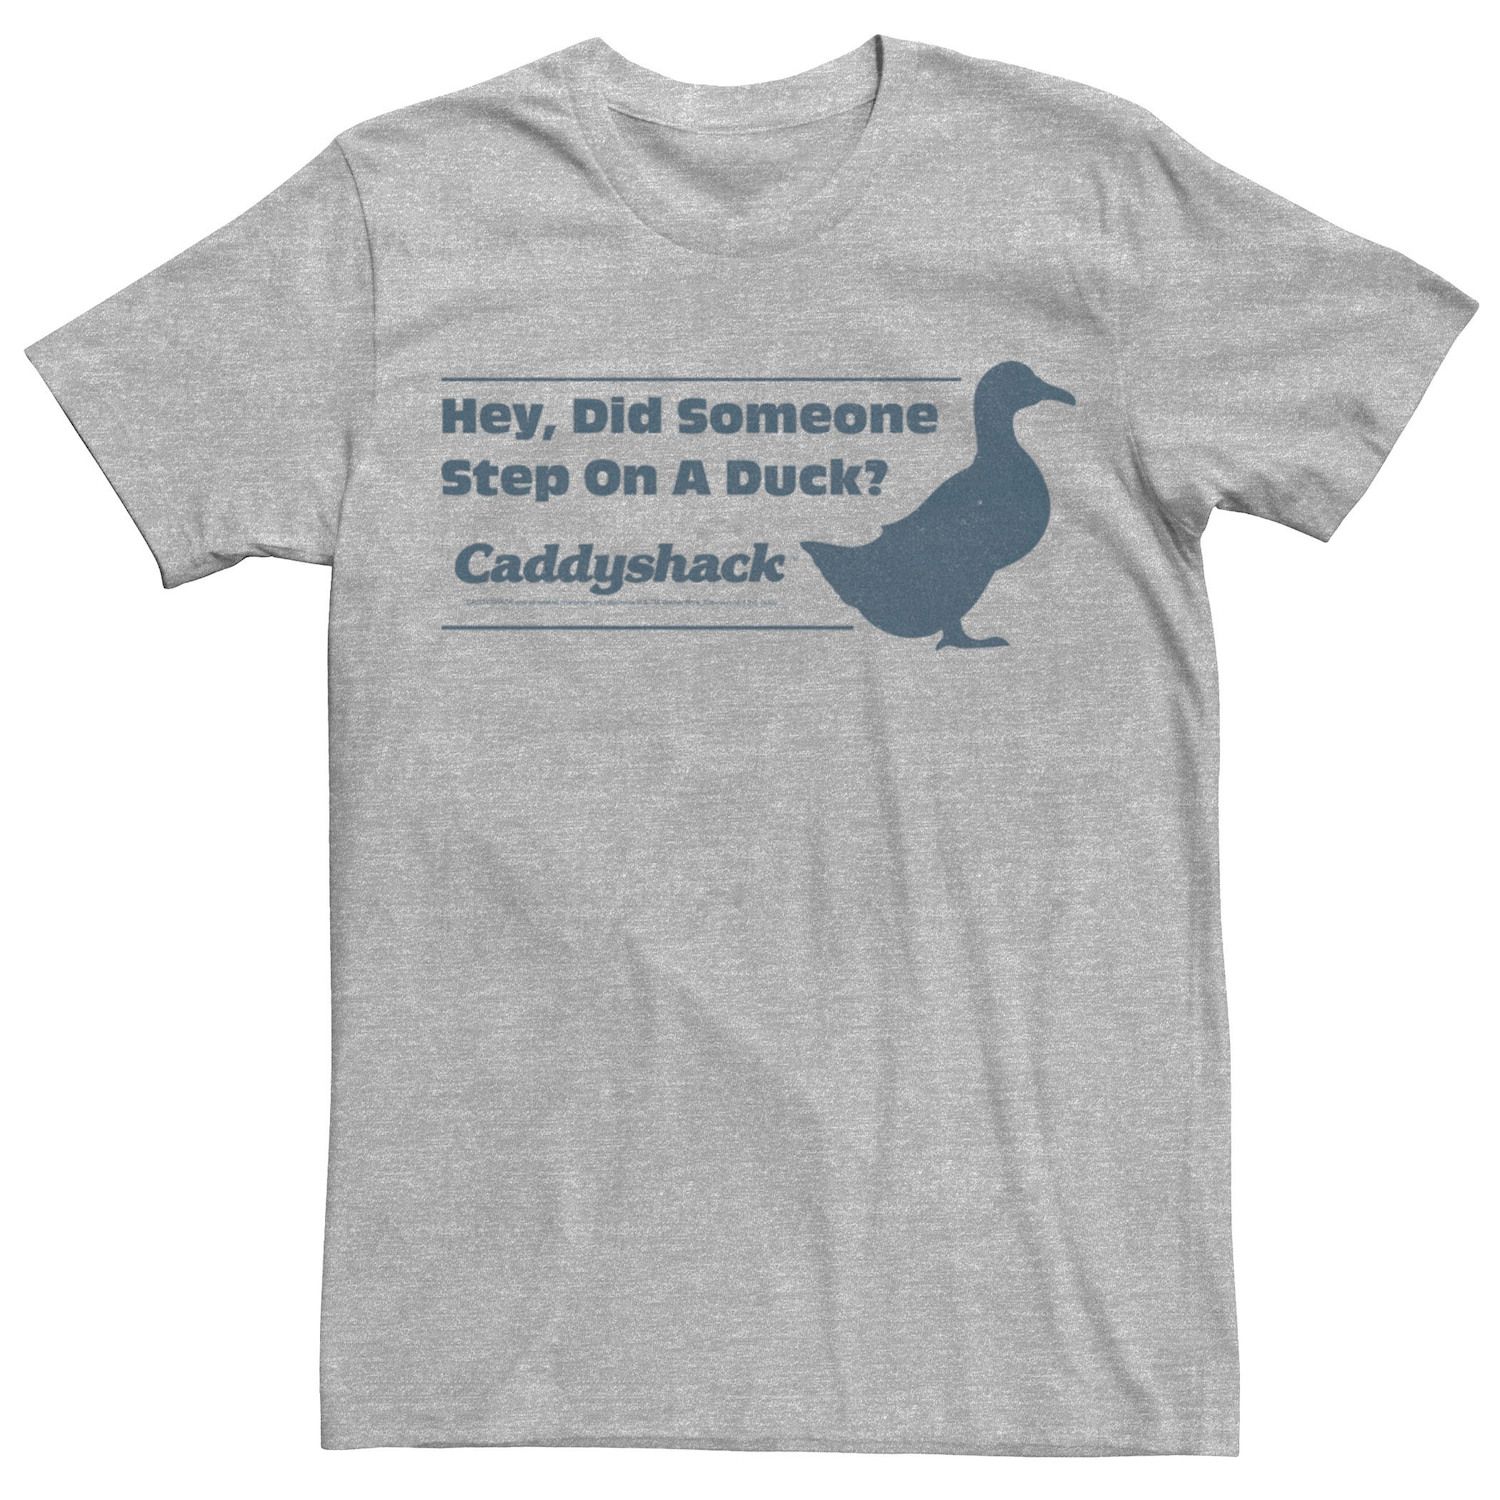 Image for Licensed Character Men's Caddyshack "Hey, Did Someone Step On A Duck?" Quote Tee at Kohl's.